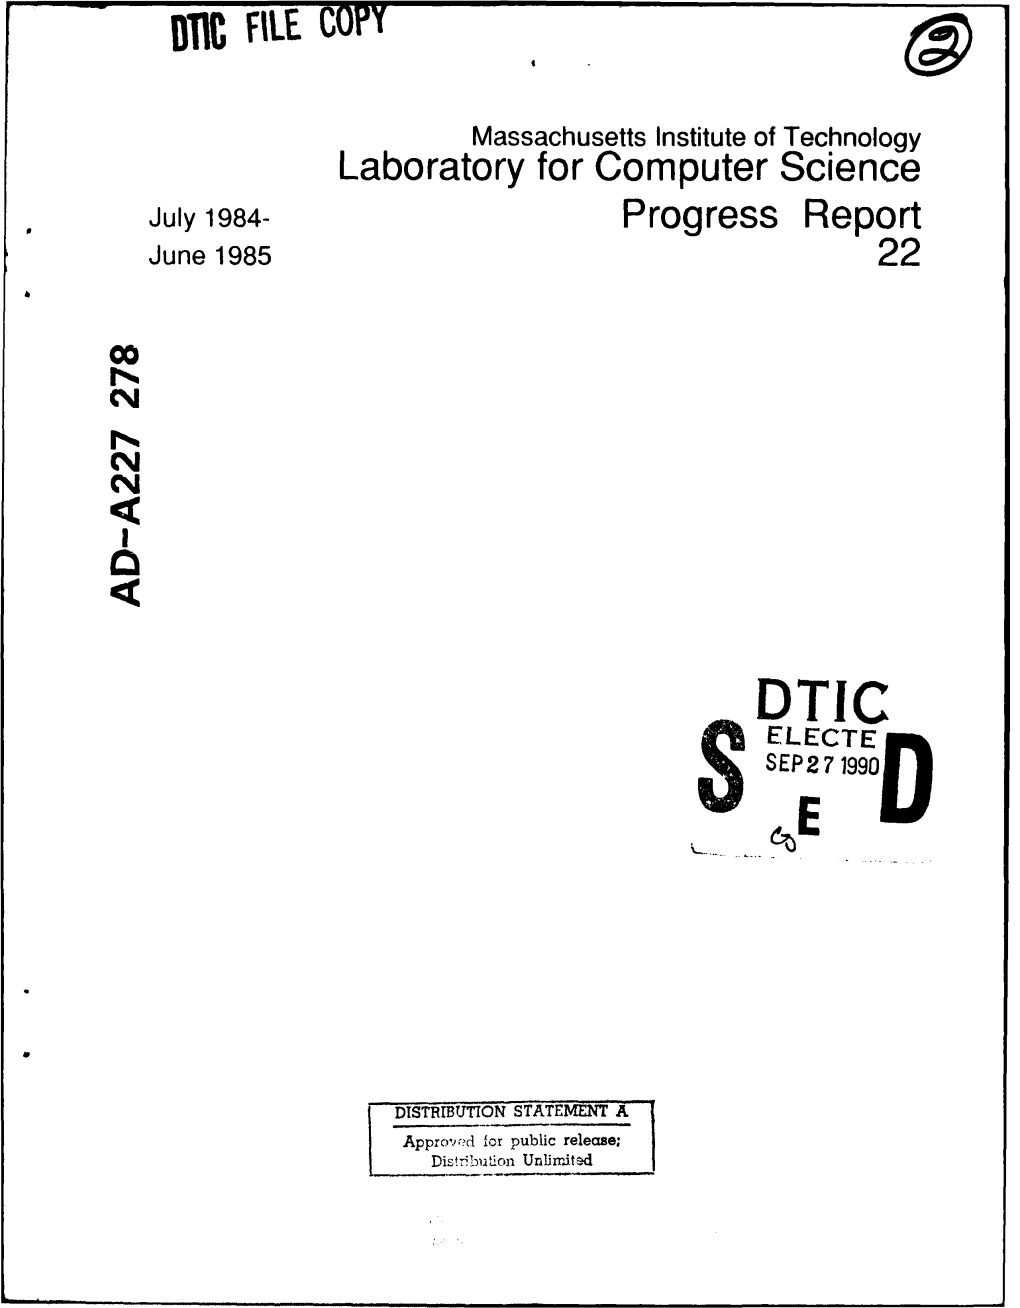 MIT Laboratory for Computer Science Progress Report, July 1984-June